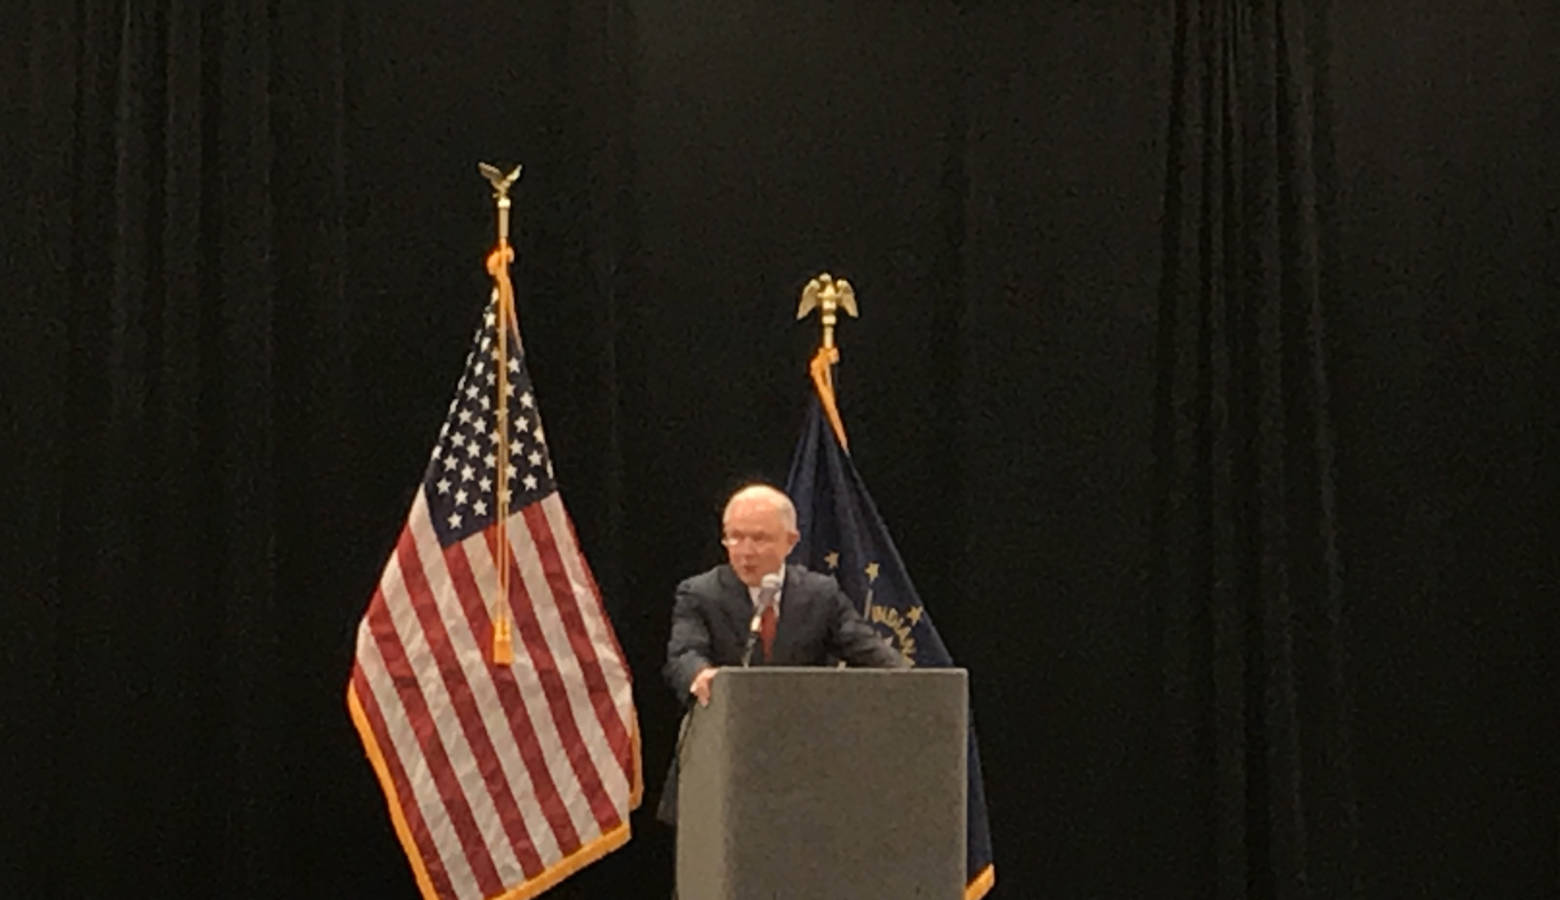 U.S. Attorney General Jeff Sessions speaks at a law enforcement conference in Indianapolis. (Brandon Smith/IPB News)